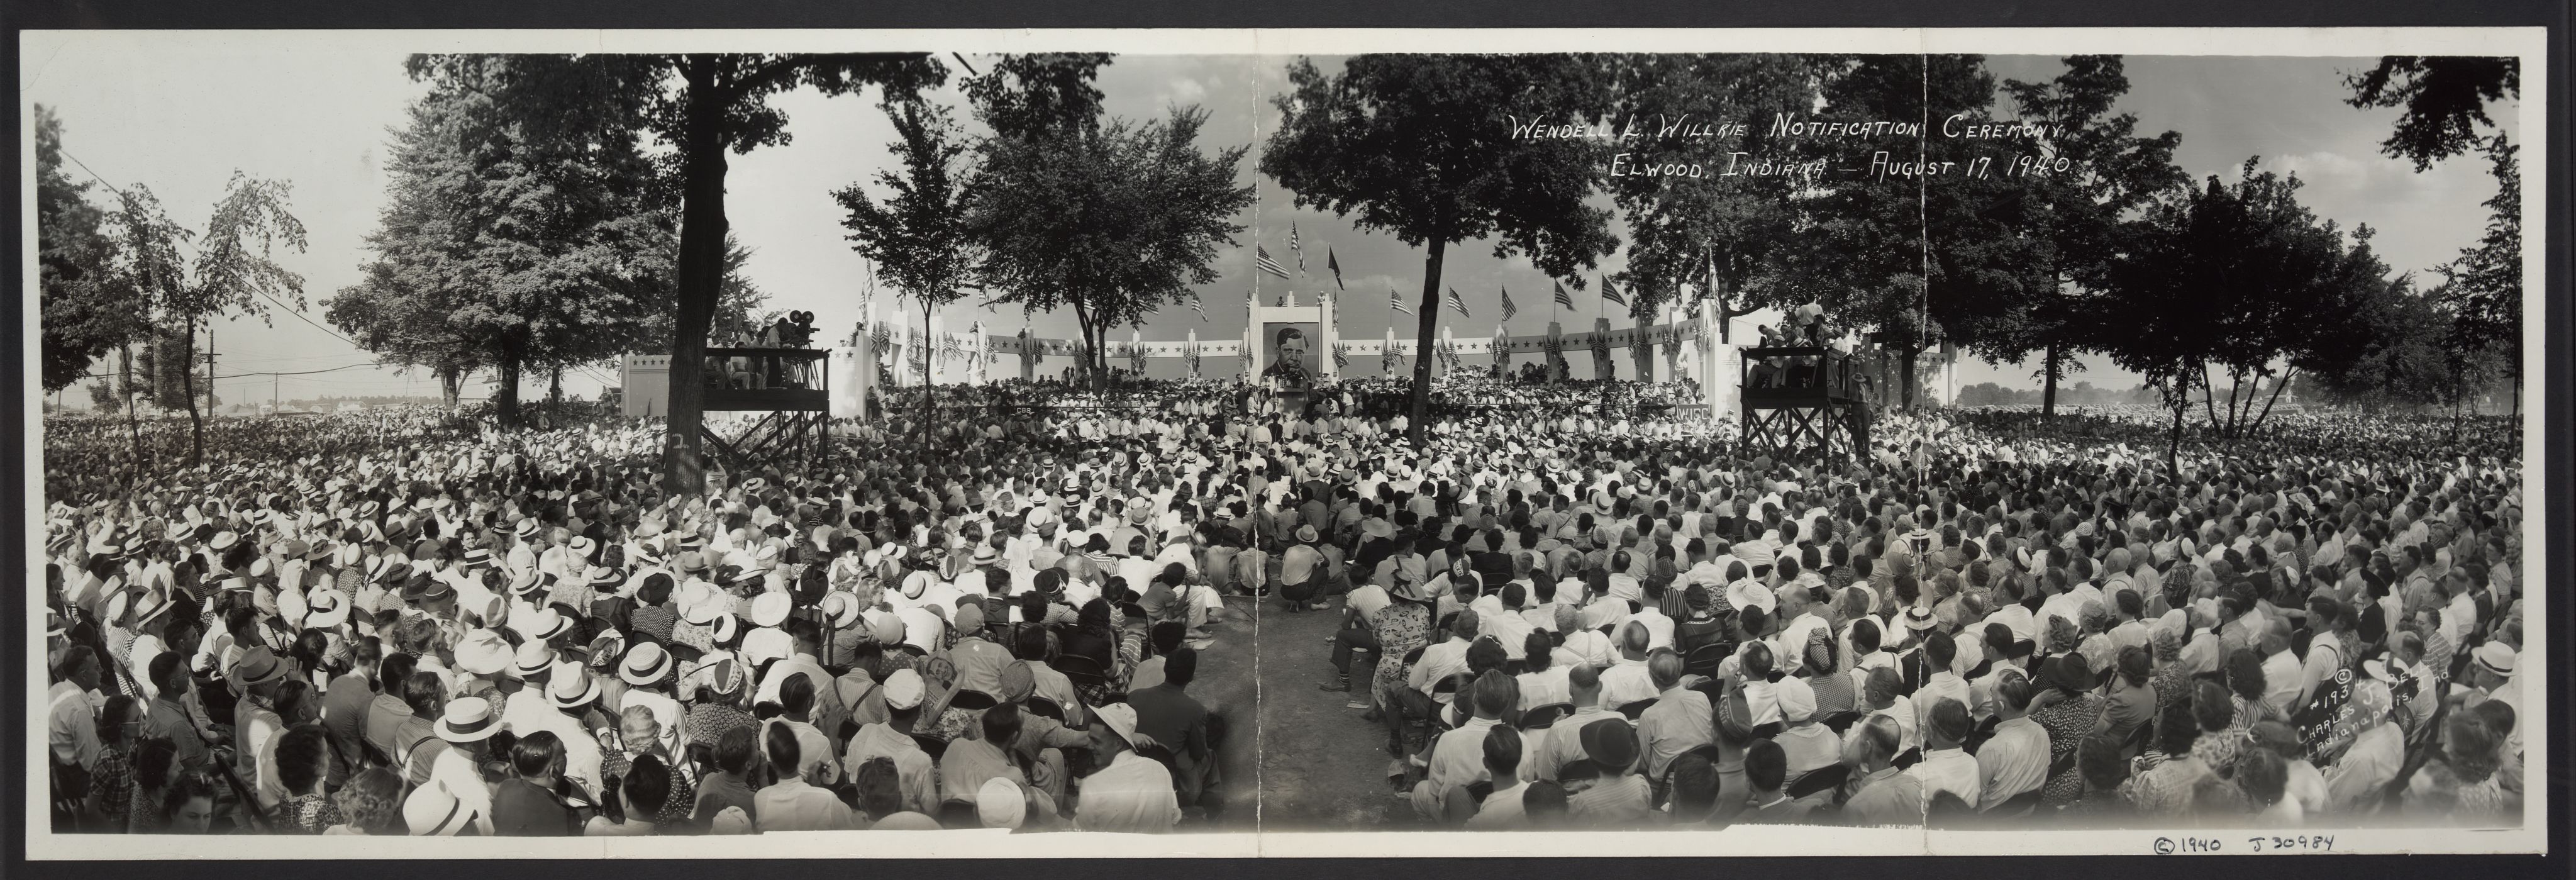 The official notification ceremony of the Republican presidential nomination for Wendell Willkie, Elwood, Indiana, August 17, 1940. Image courtesy of the Library of Congress.